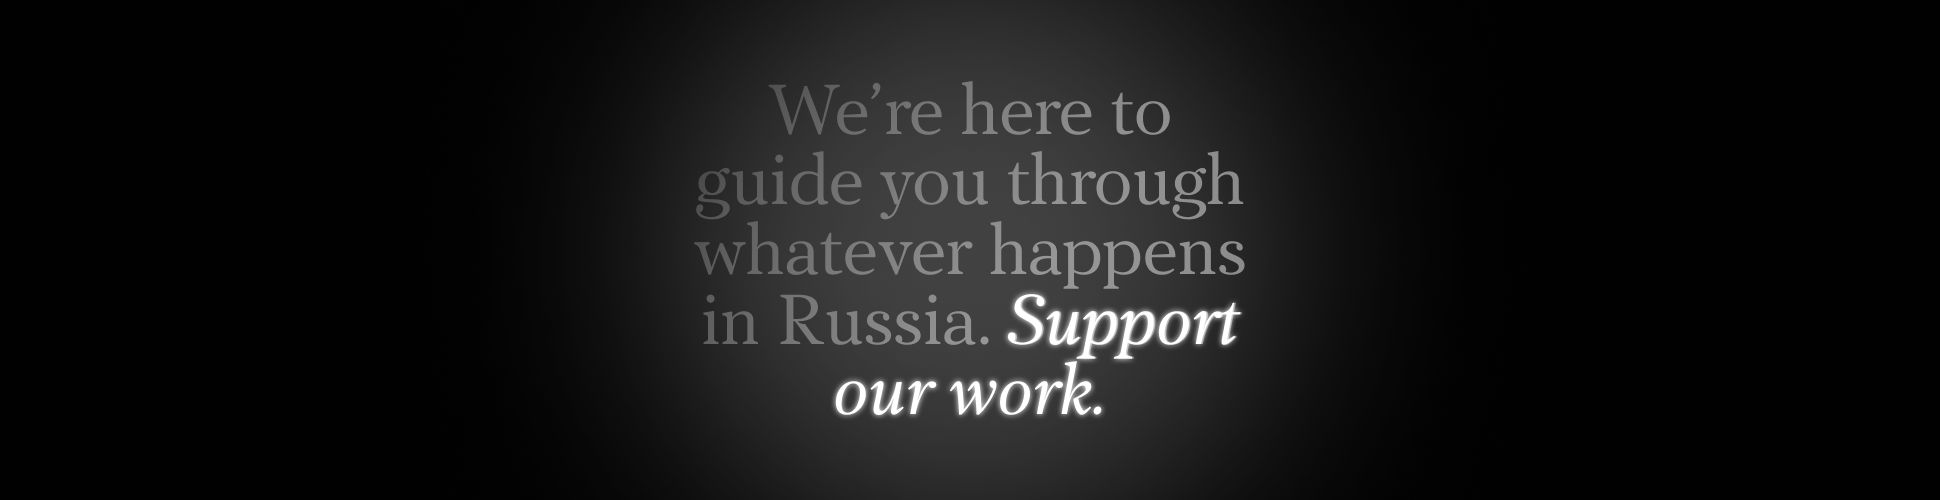 We’re here to guide you through whatever happens in Russia. Support our work.